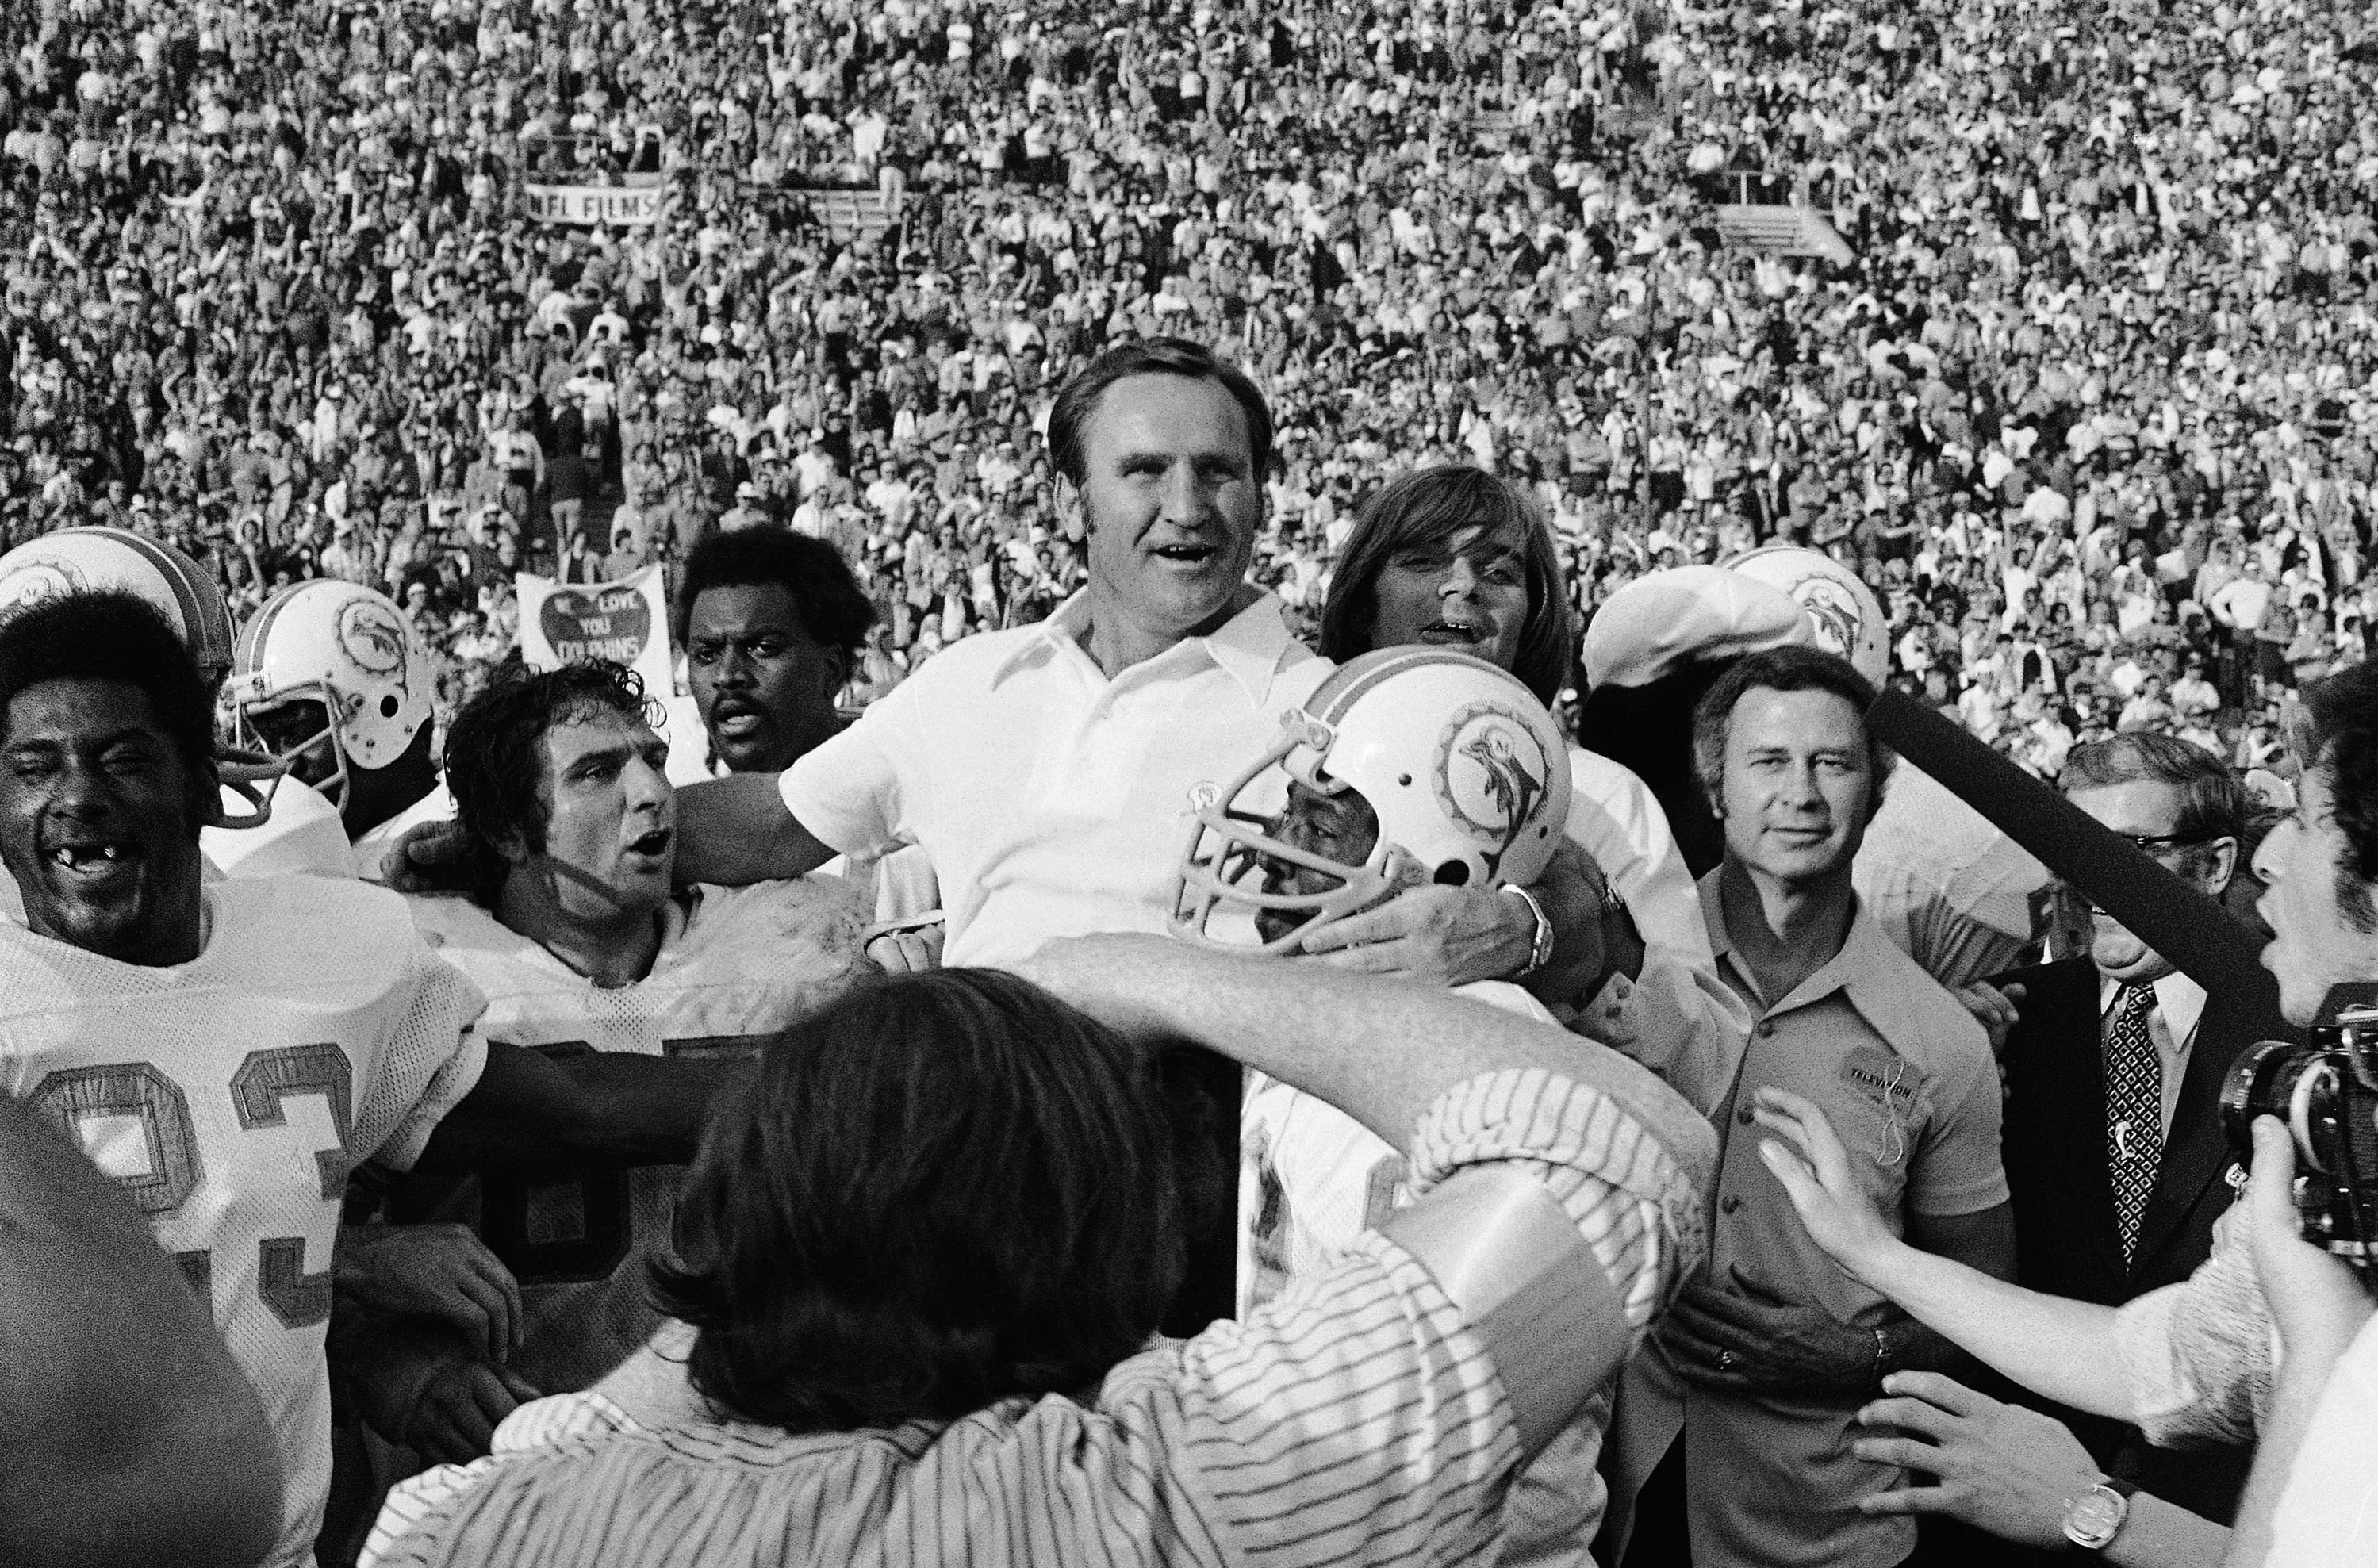 Miami Dolphins coach Don Shula is carried off the field following the team's victory over the Washington Redskins in Super Bowl VII.